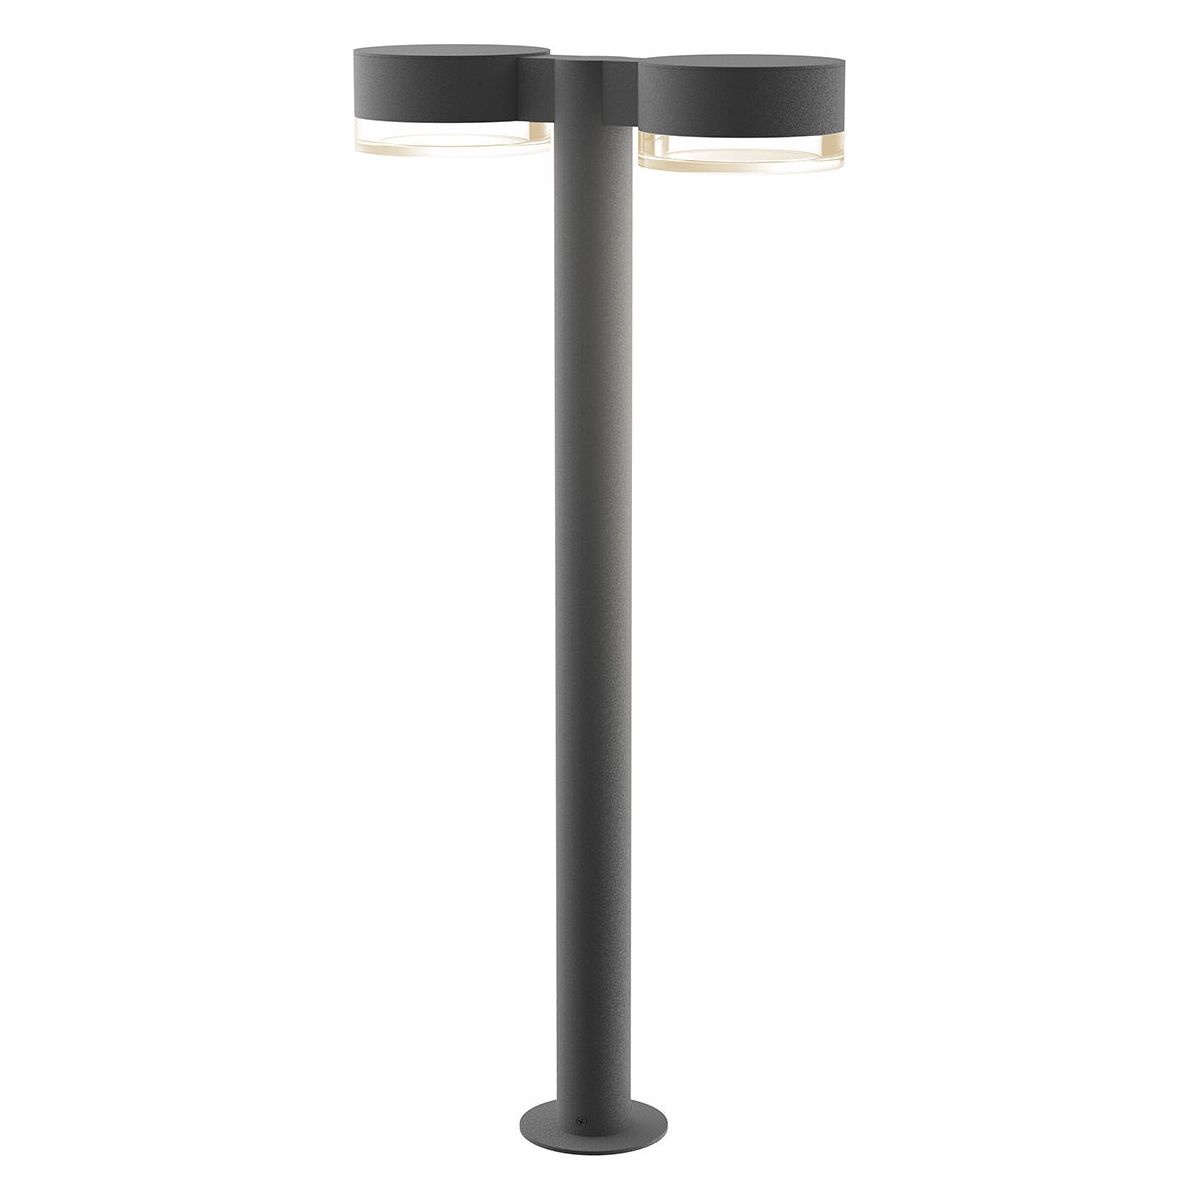 REALS 28" LED Double Bollard with Plate Cap and Cylinder Lens